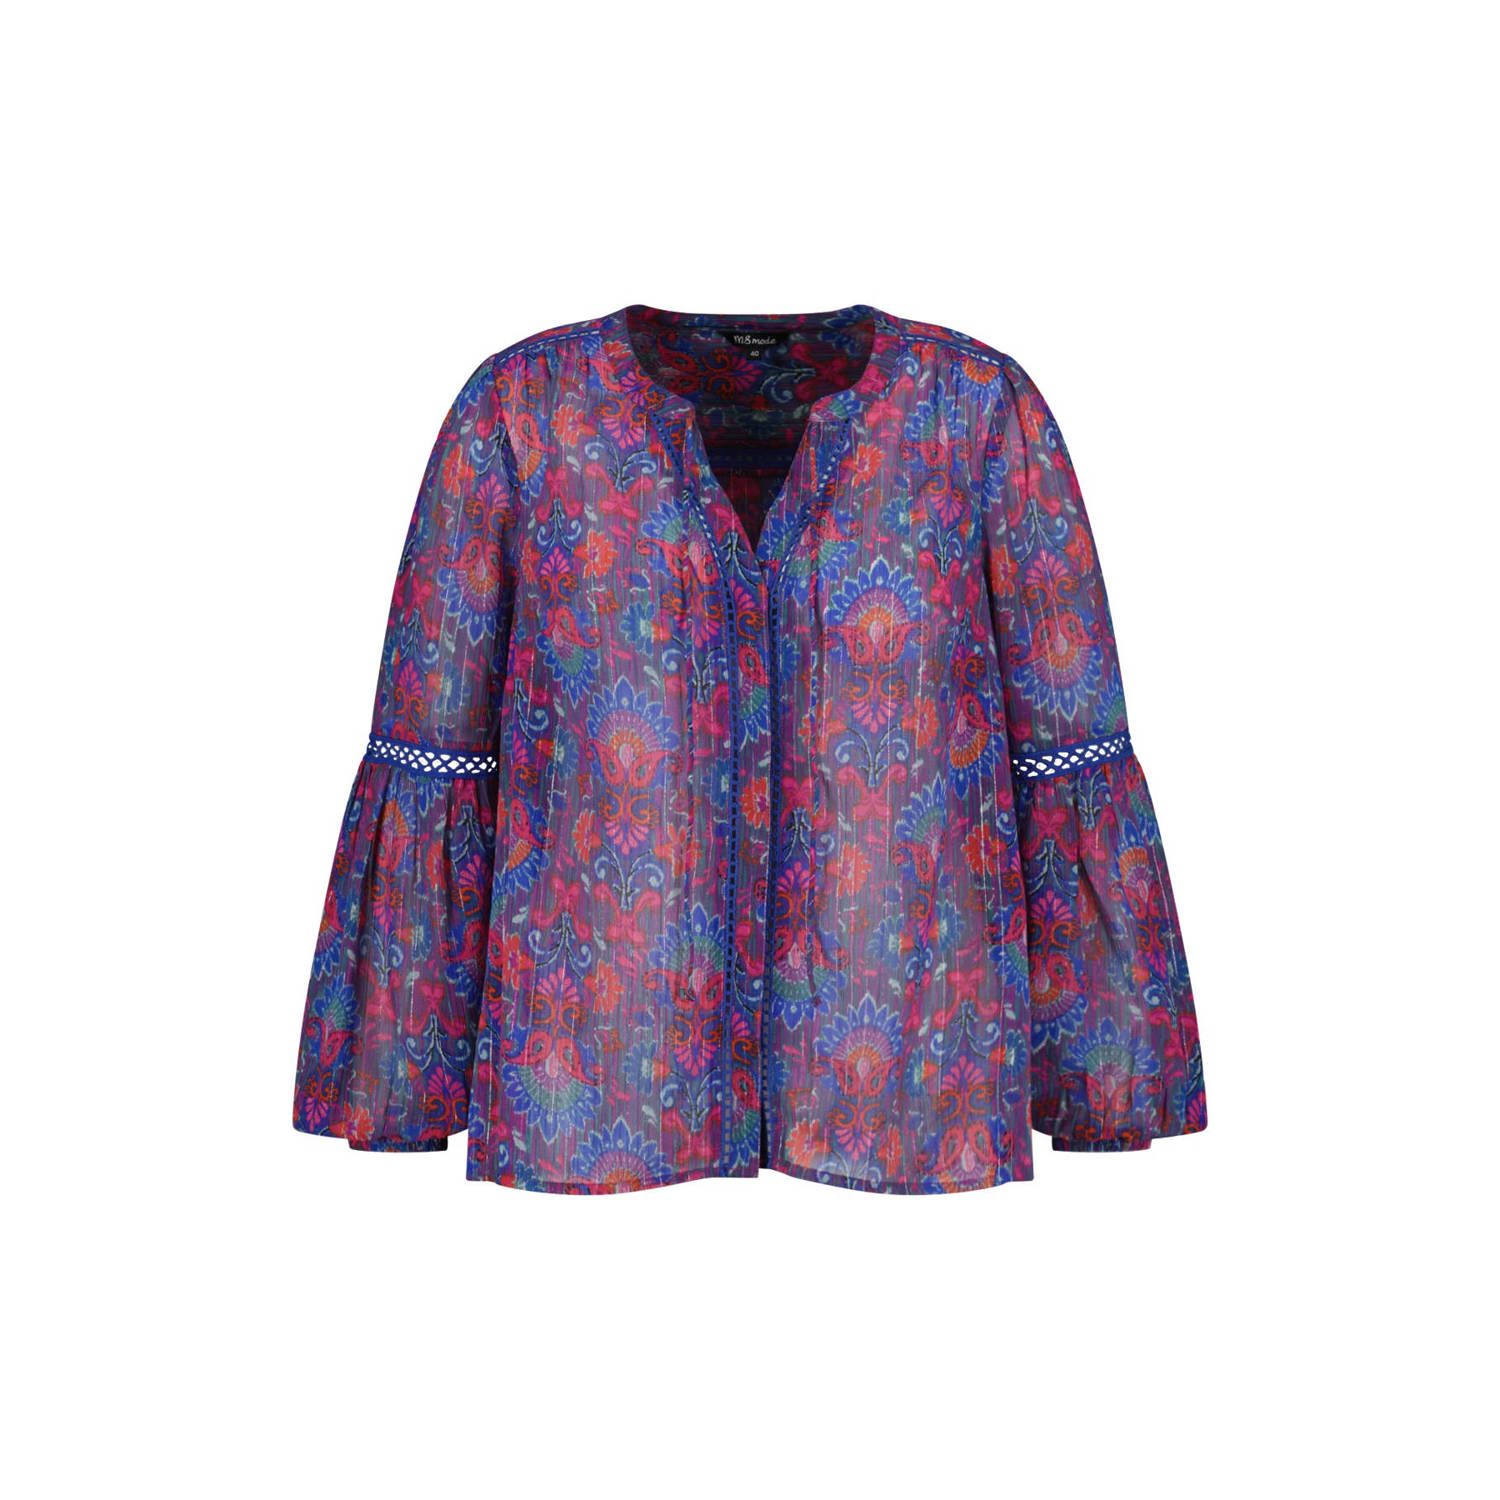 MS Mode blouse met paisleyprint roze rood blauw